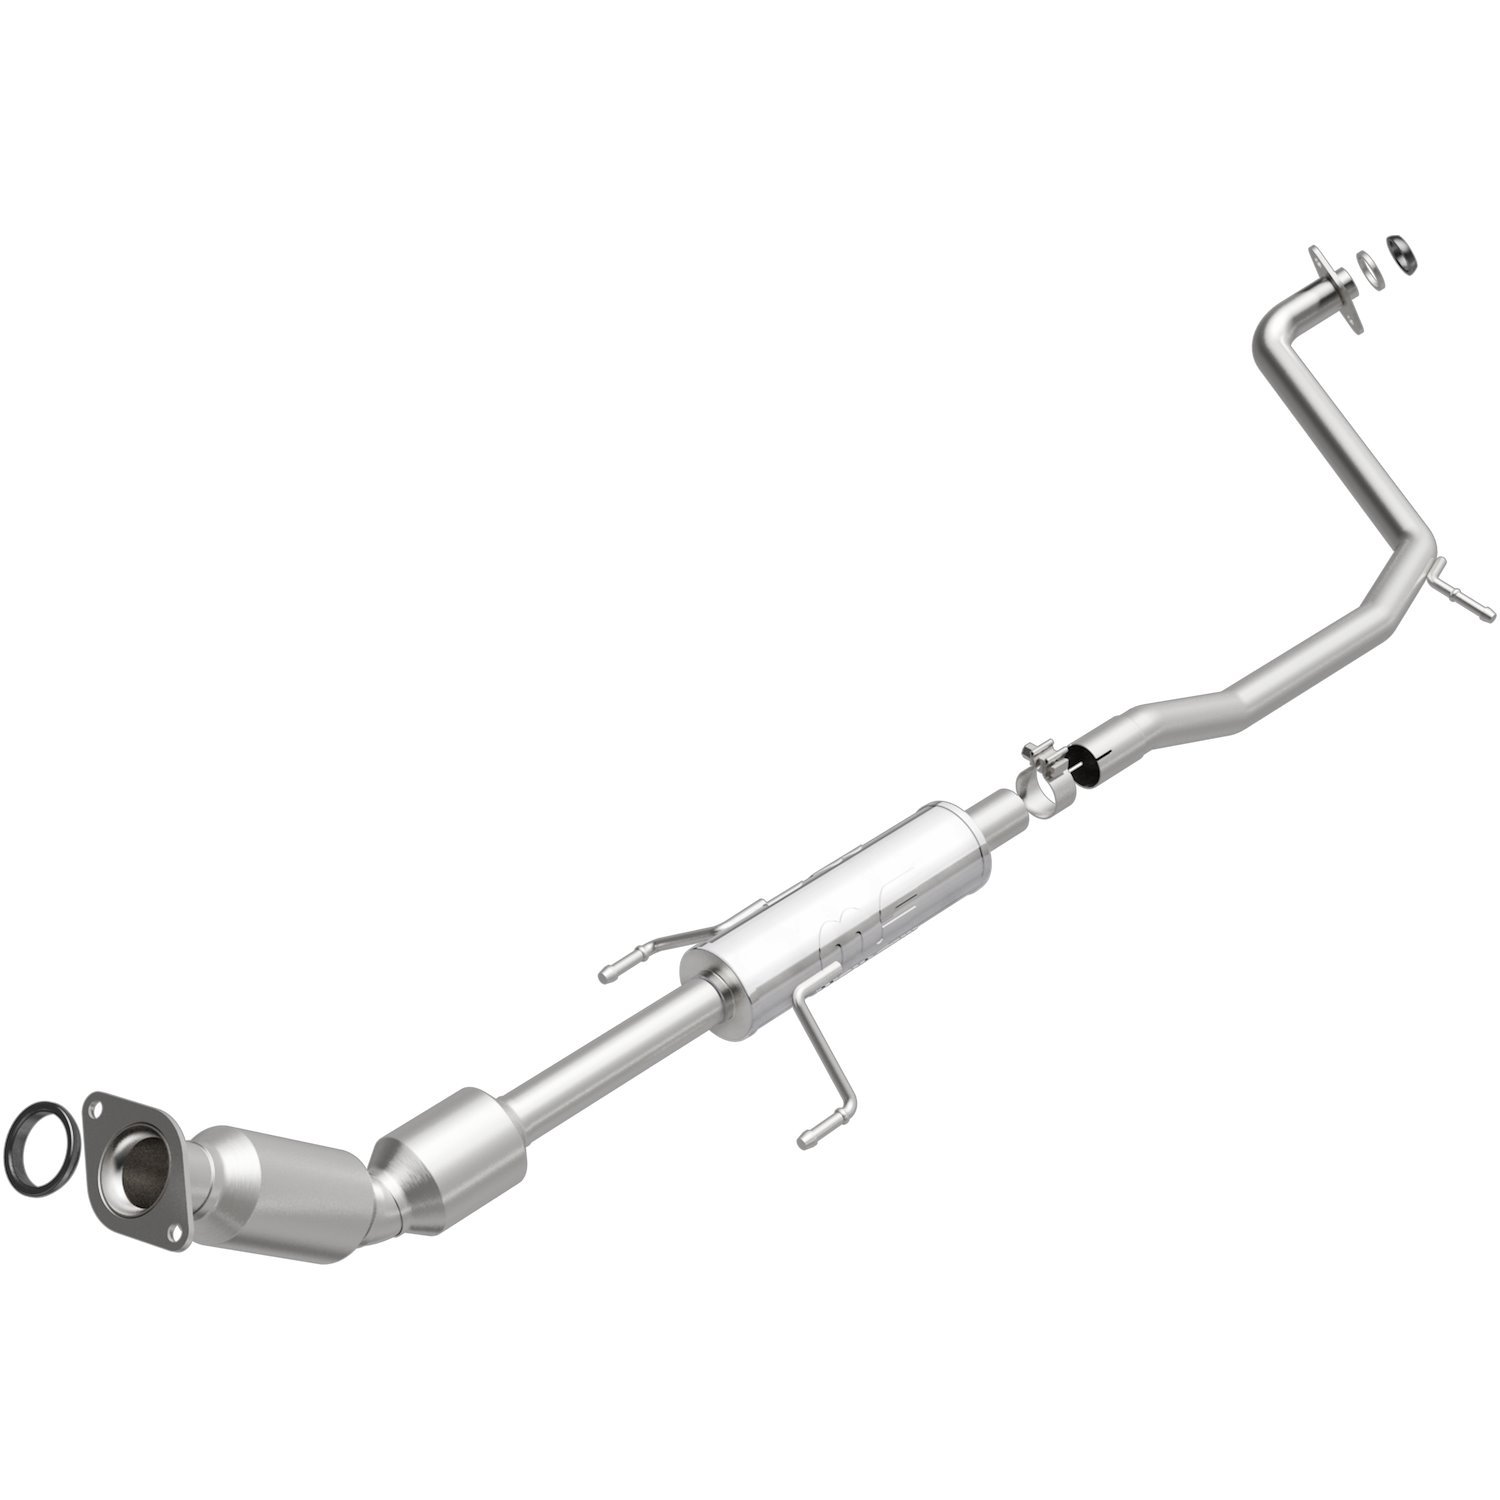 2010-2015 Toyota Prius OEM Grade Federal / EPA Compliant Direct-Fit Catalytic Converter